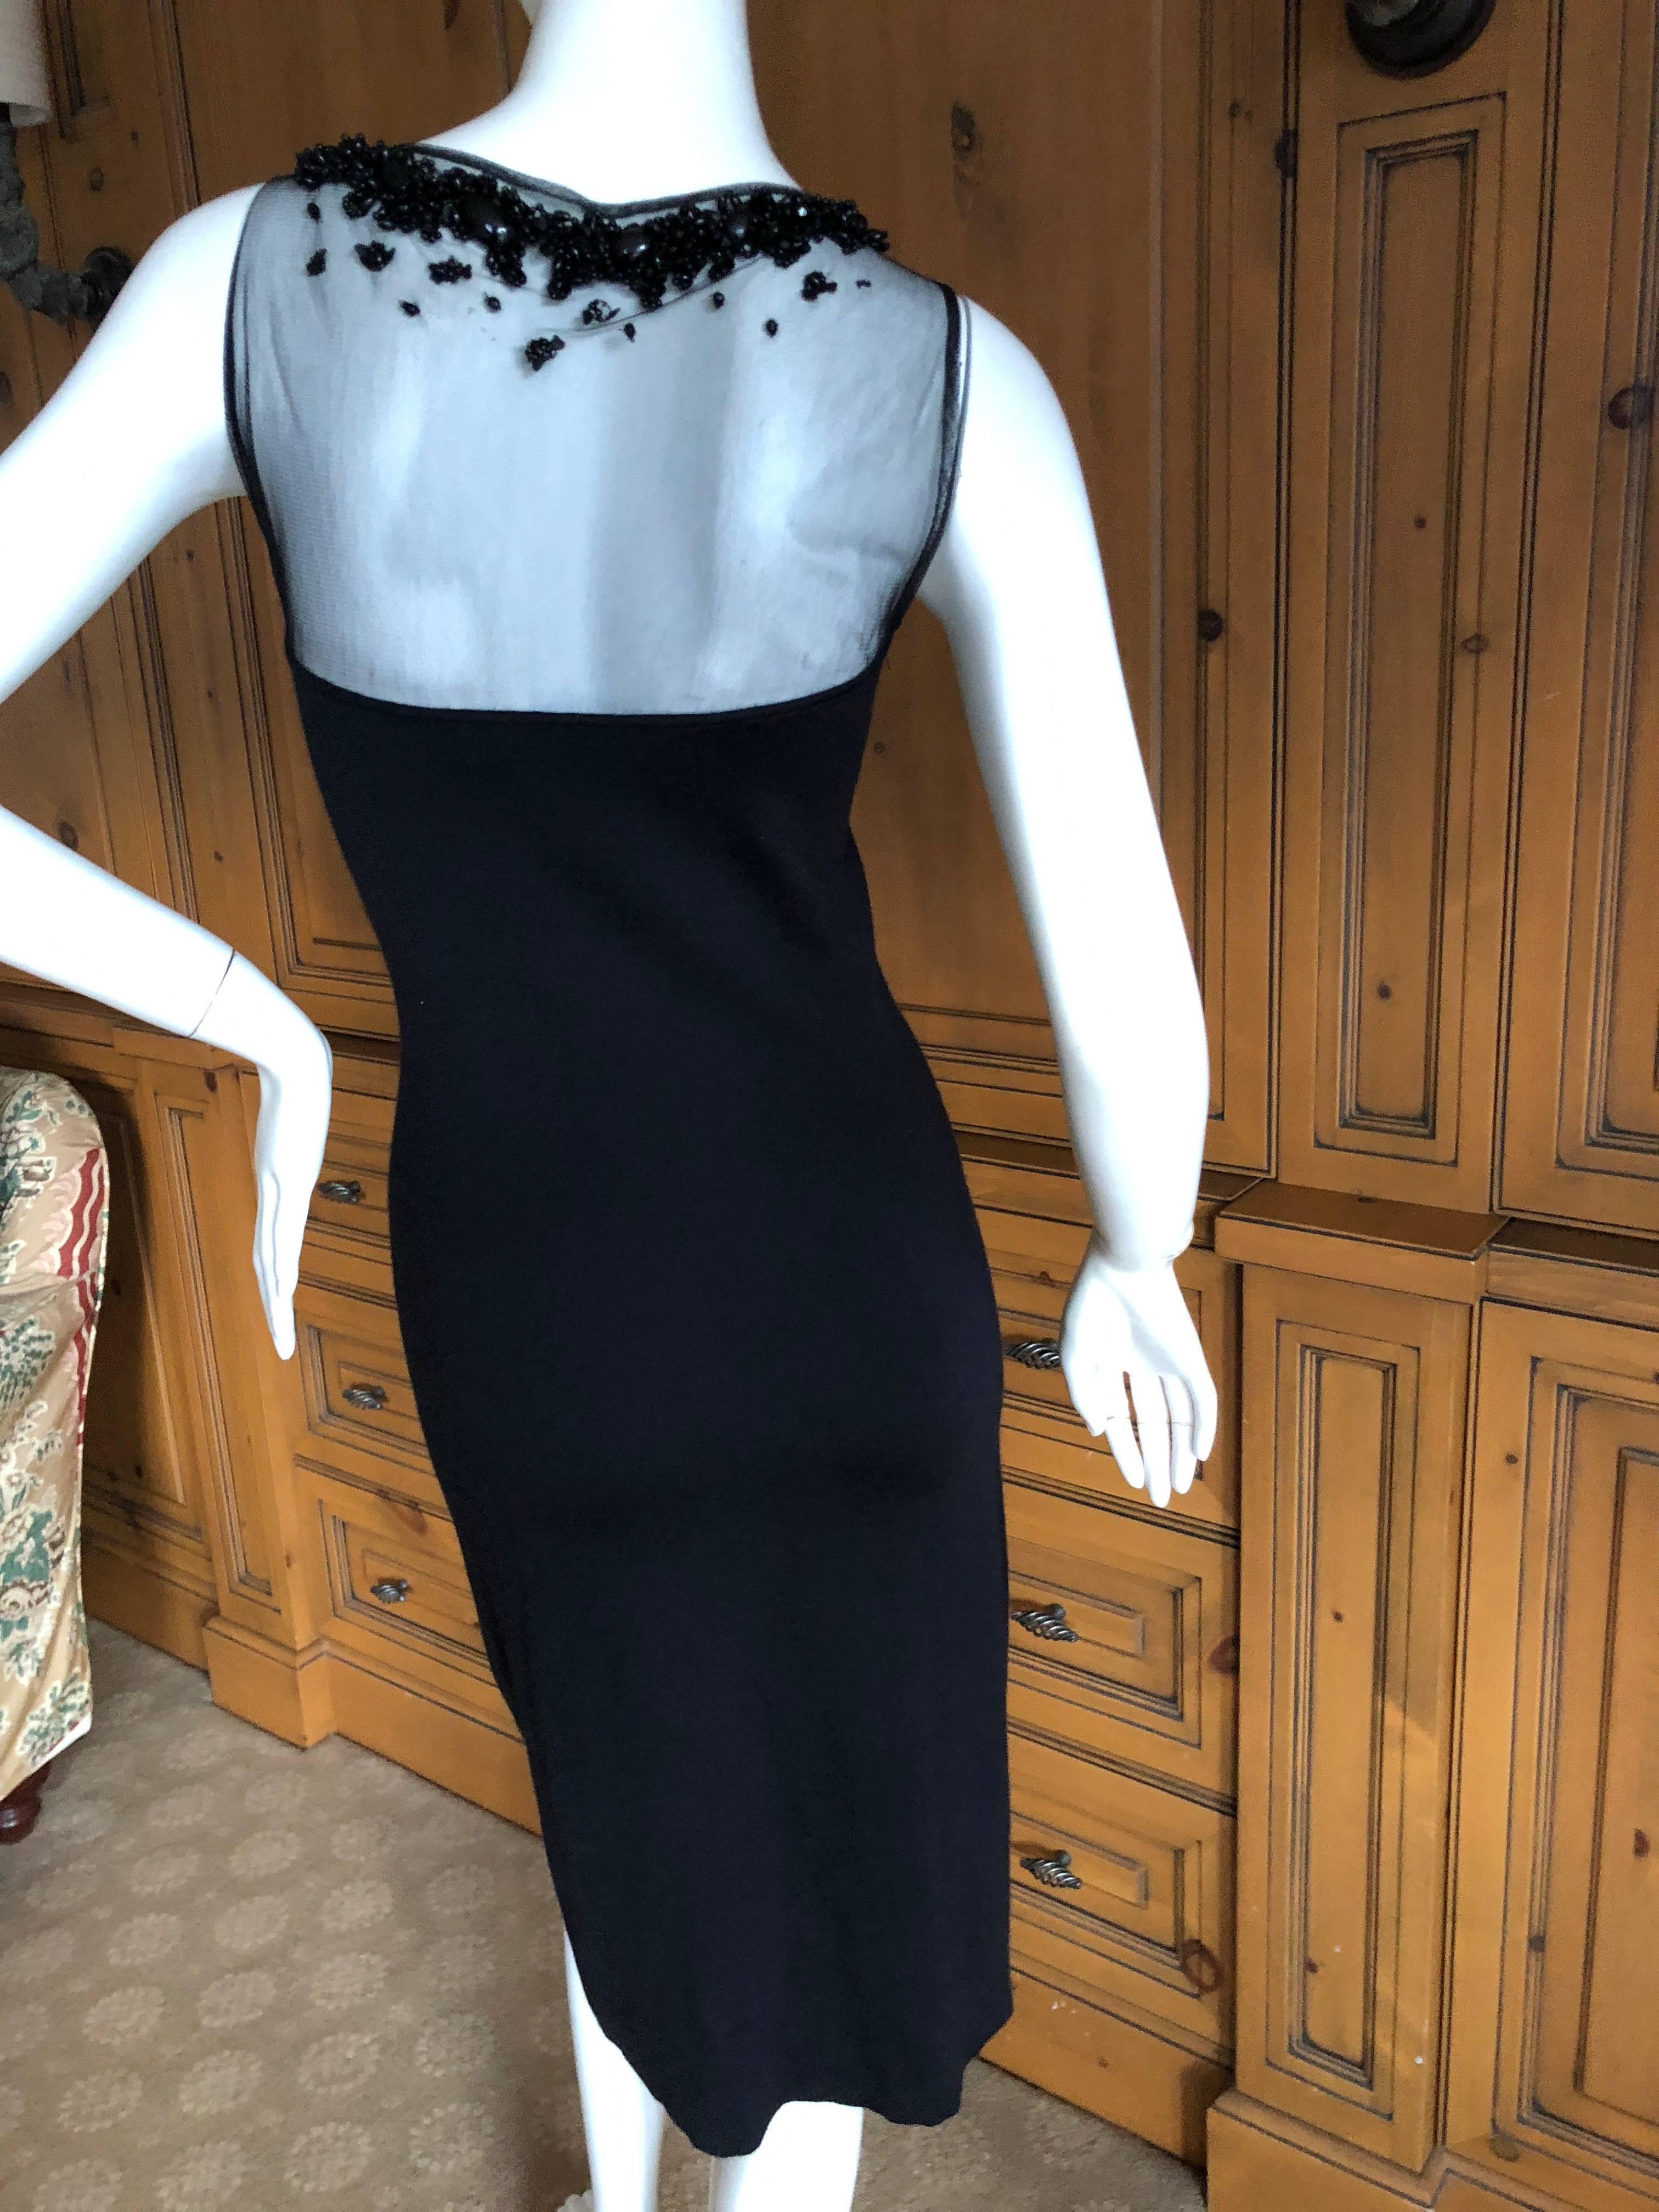 Christian Dior Classic Black Cashmere Cocktail Dress w Jeweled Collar by Lesage For Sale 5